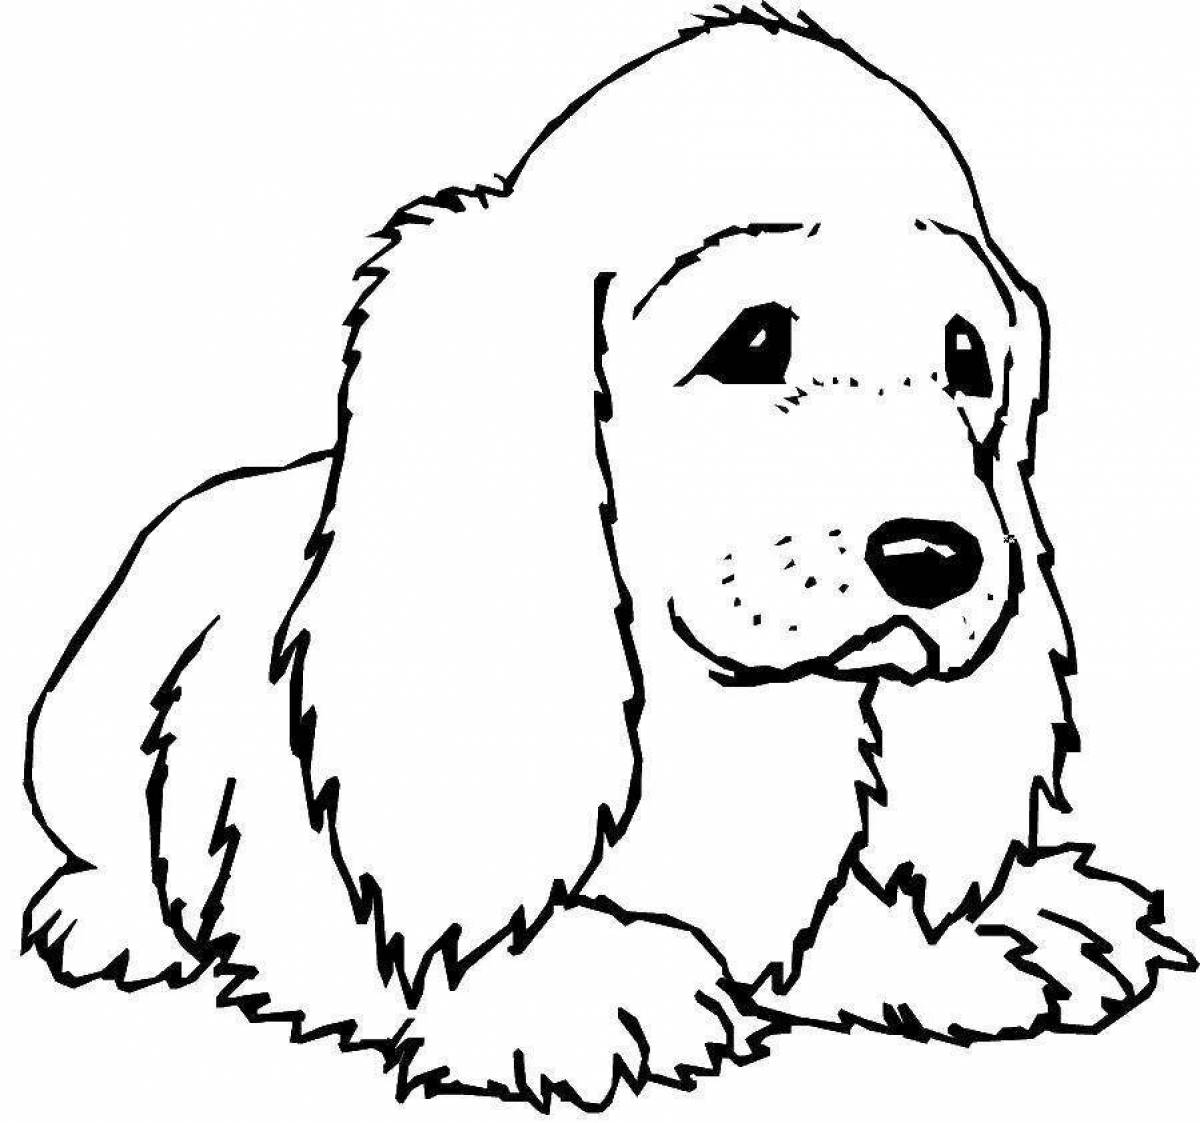 Attractive coloring drawing of a dog